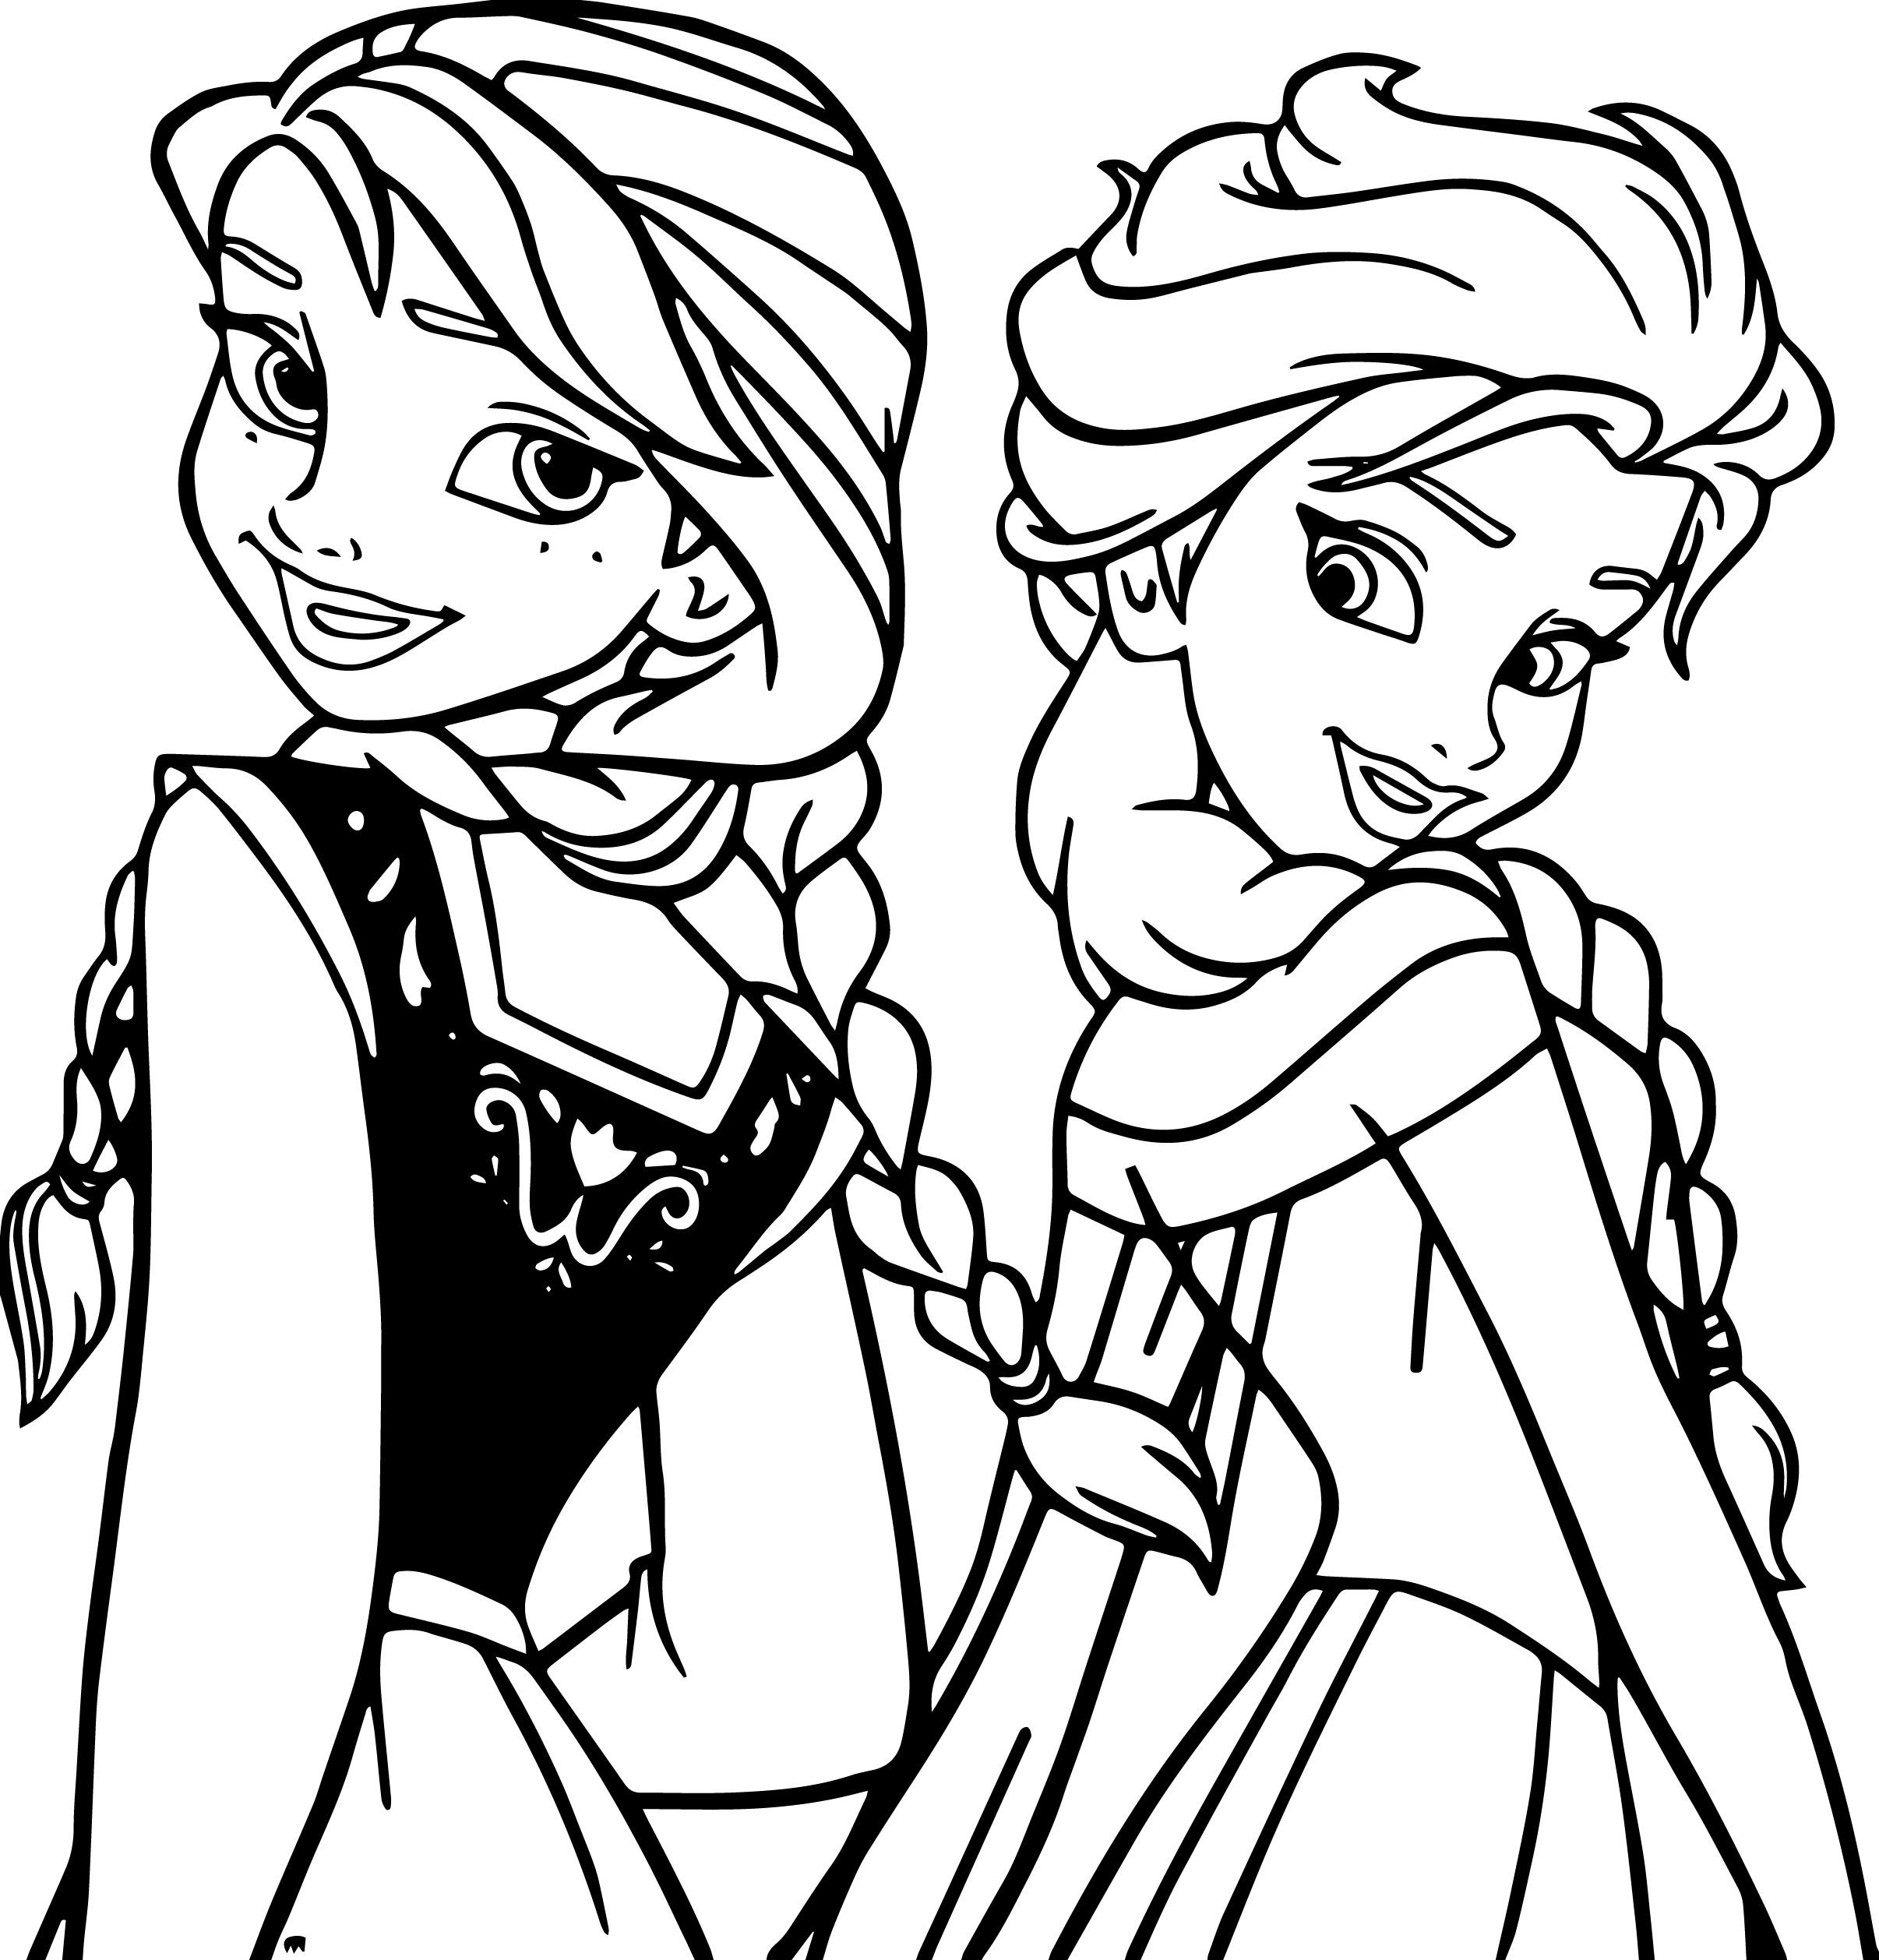 Kids Coloring Pages Frozen
 60 Disney Frozen coloring pages & Frozen Birthday party